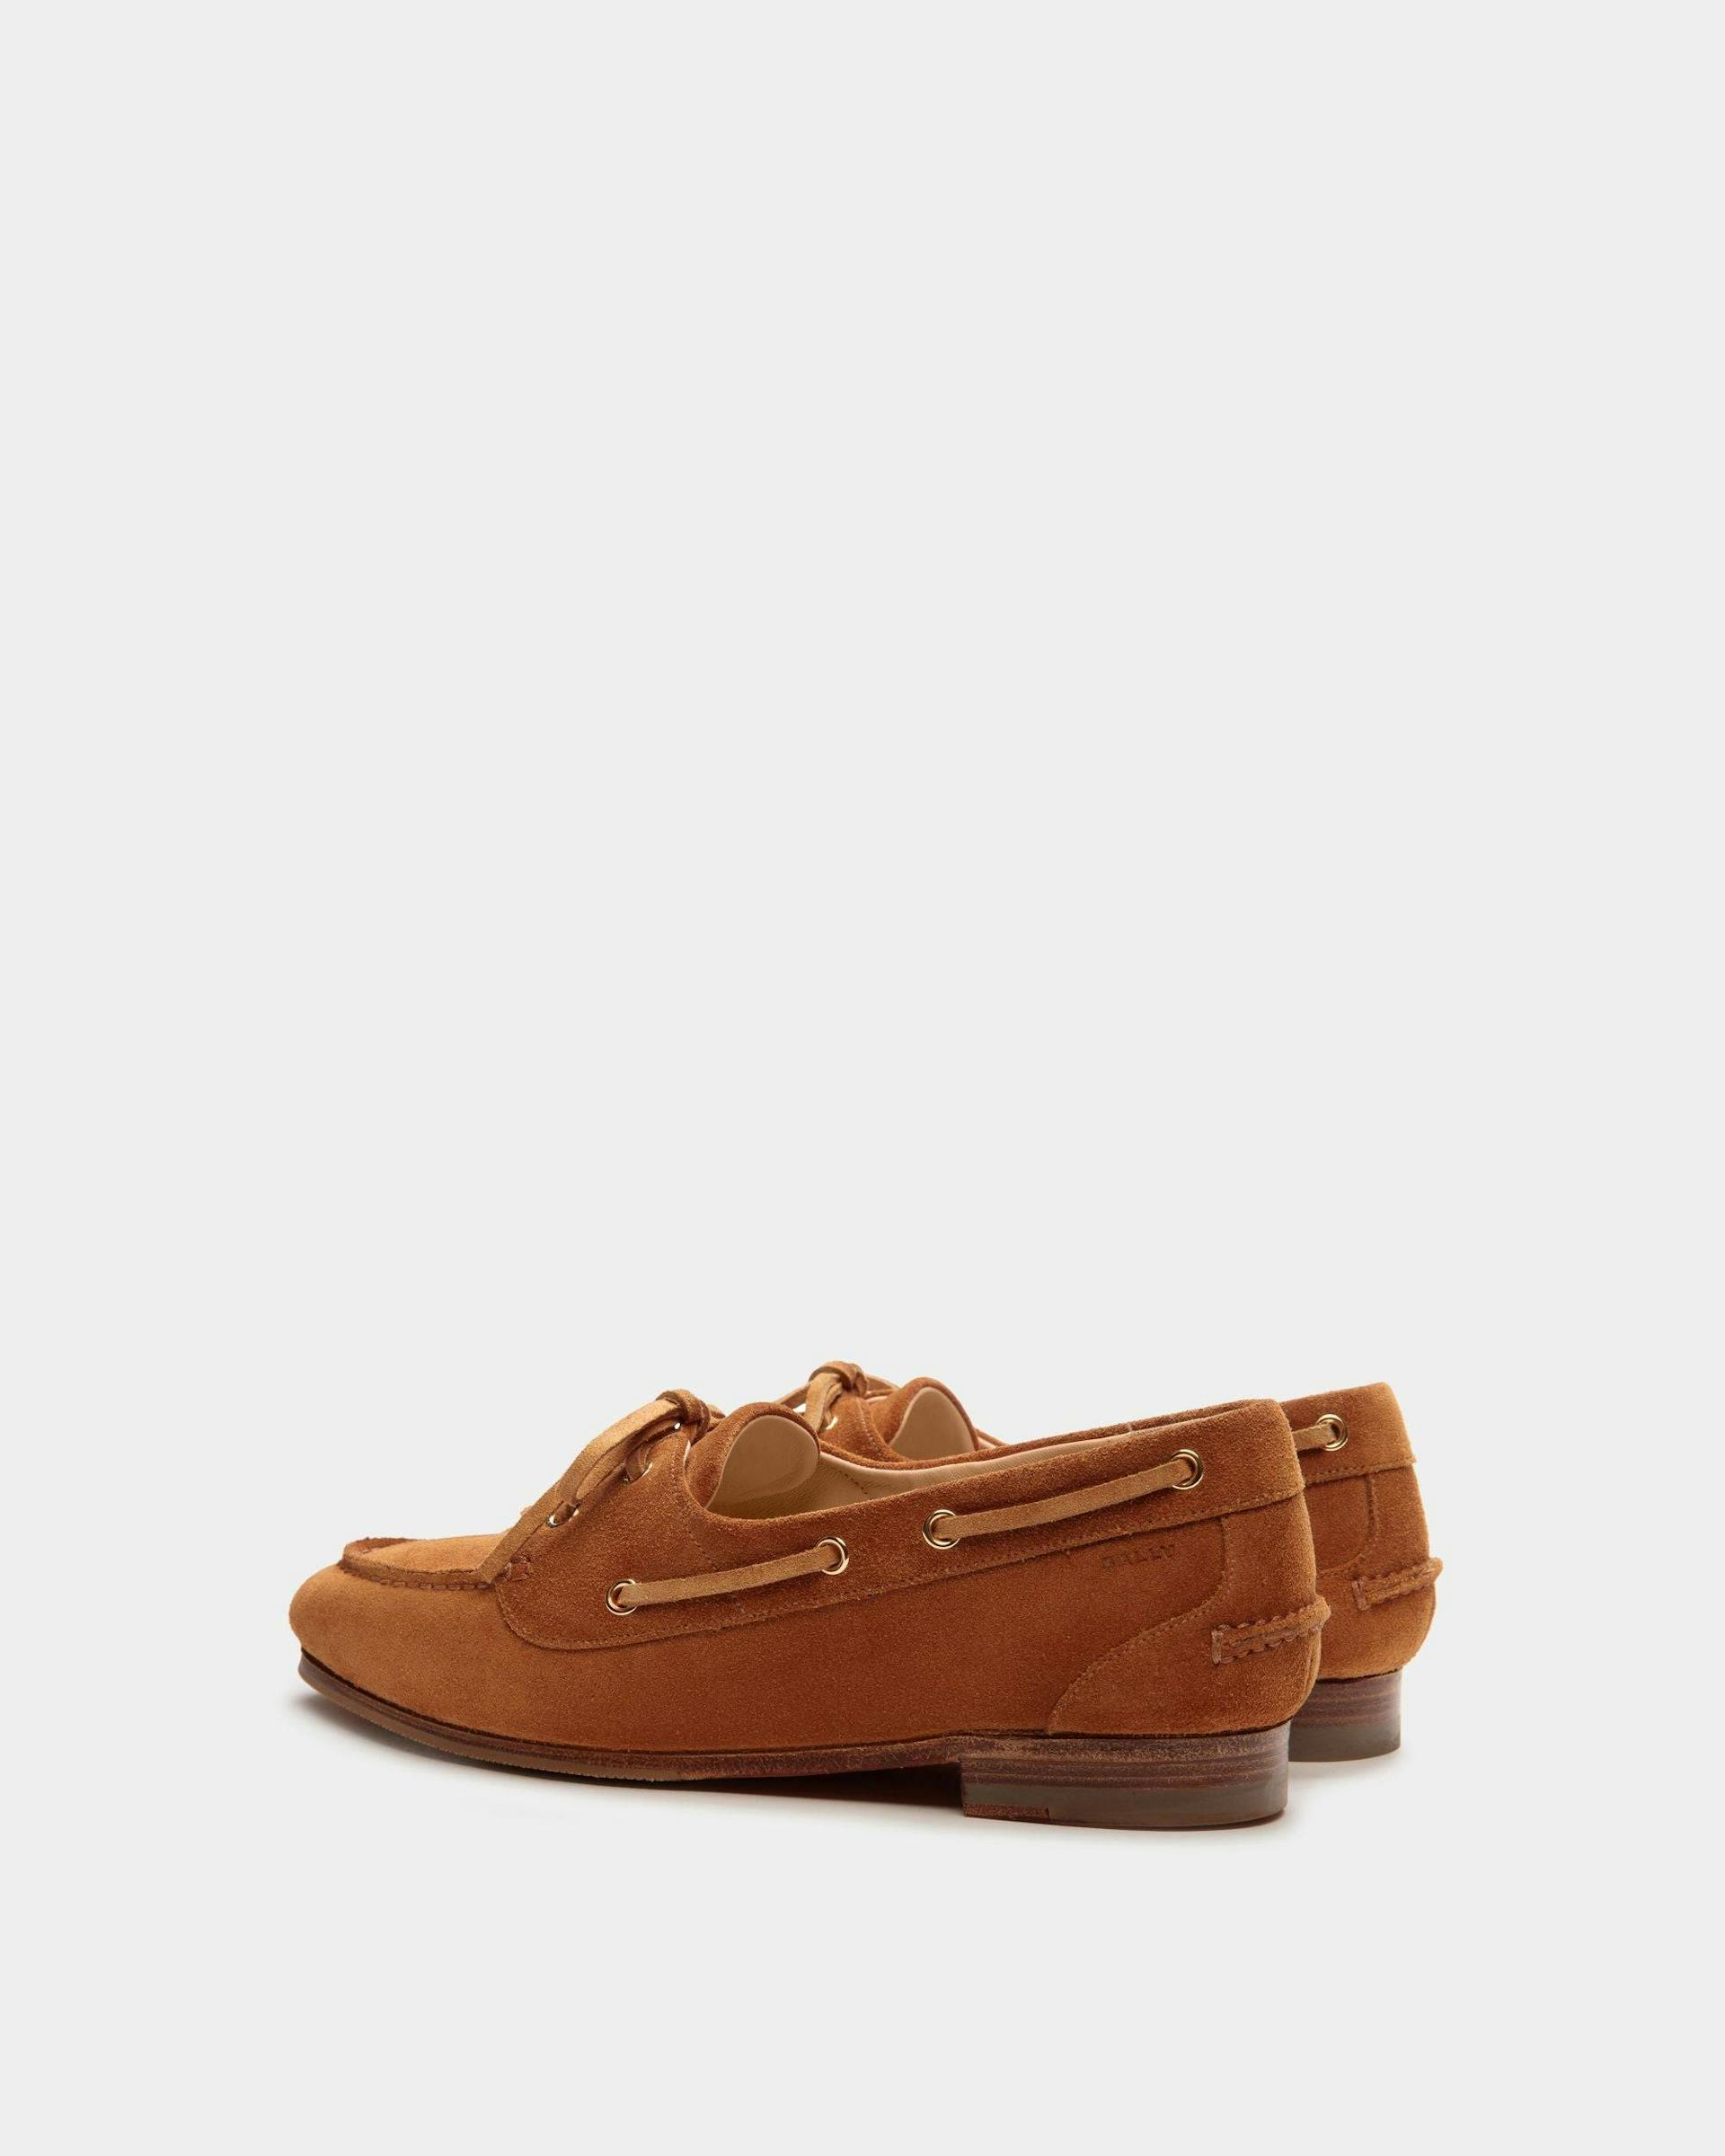 Women's Plume Moccasin in Brown Suede | Bally | Still Life 3/4 Back